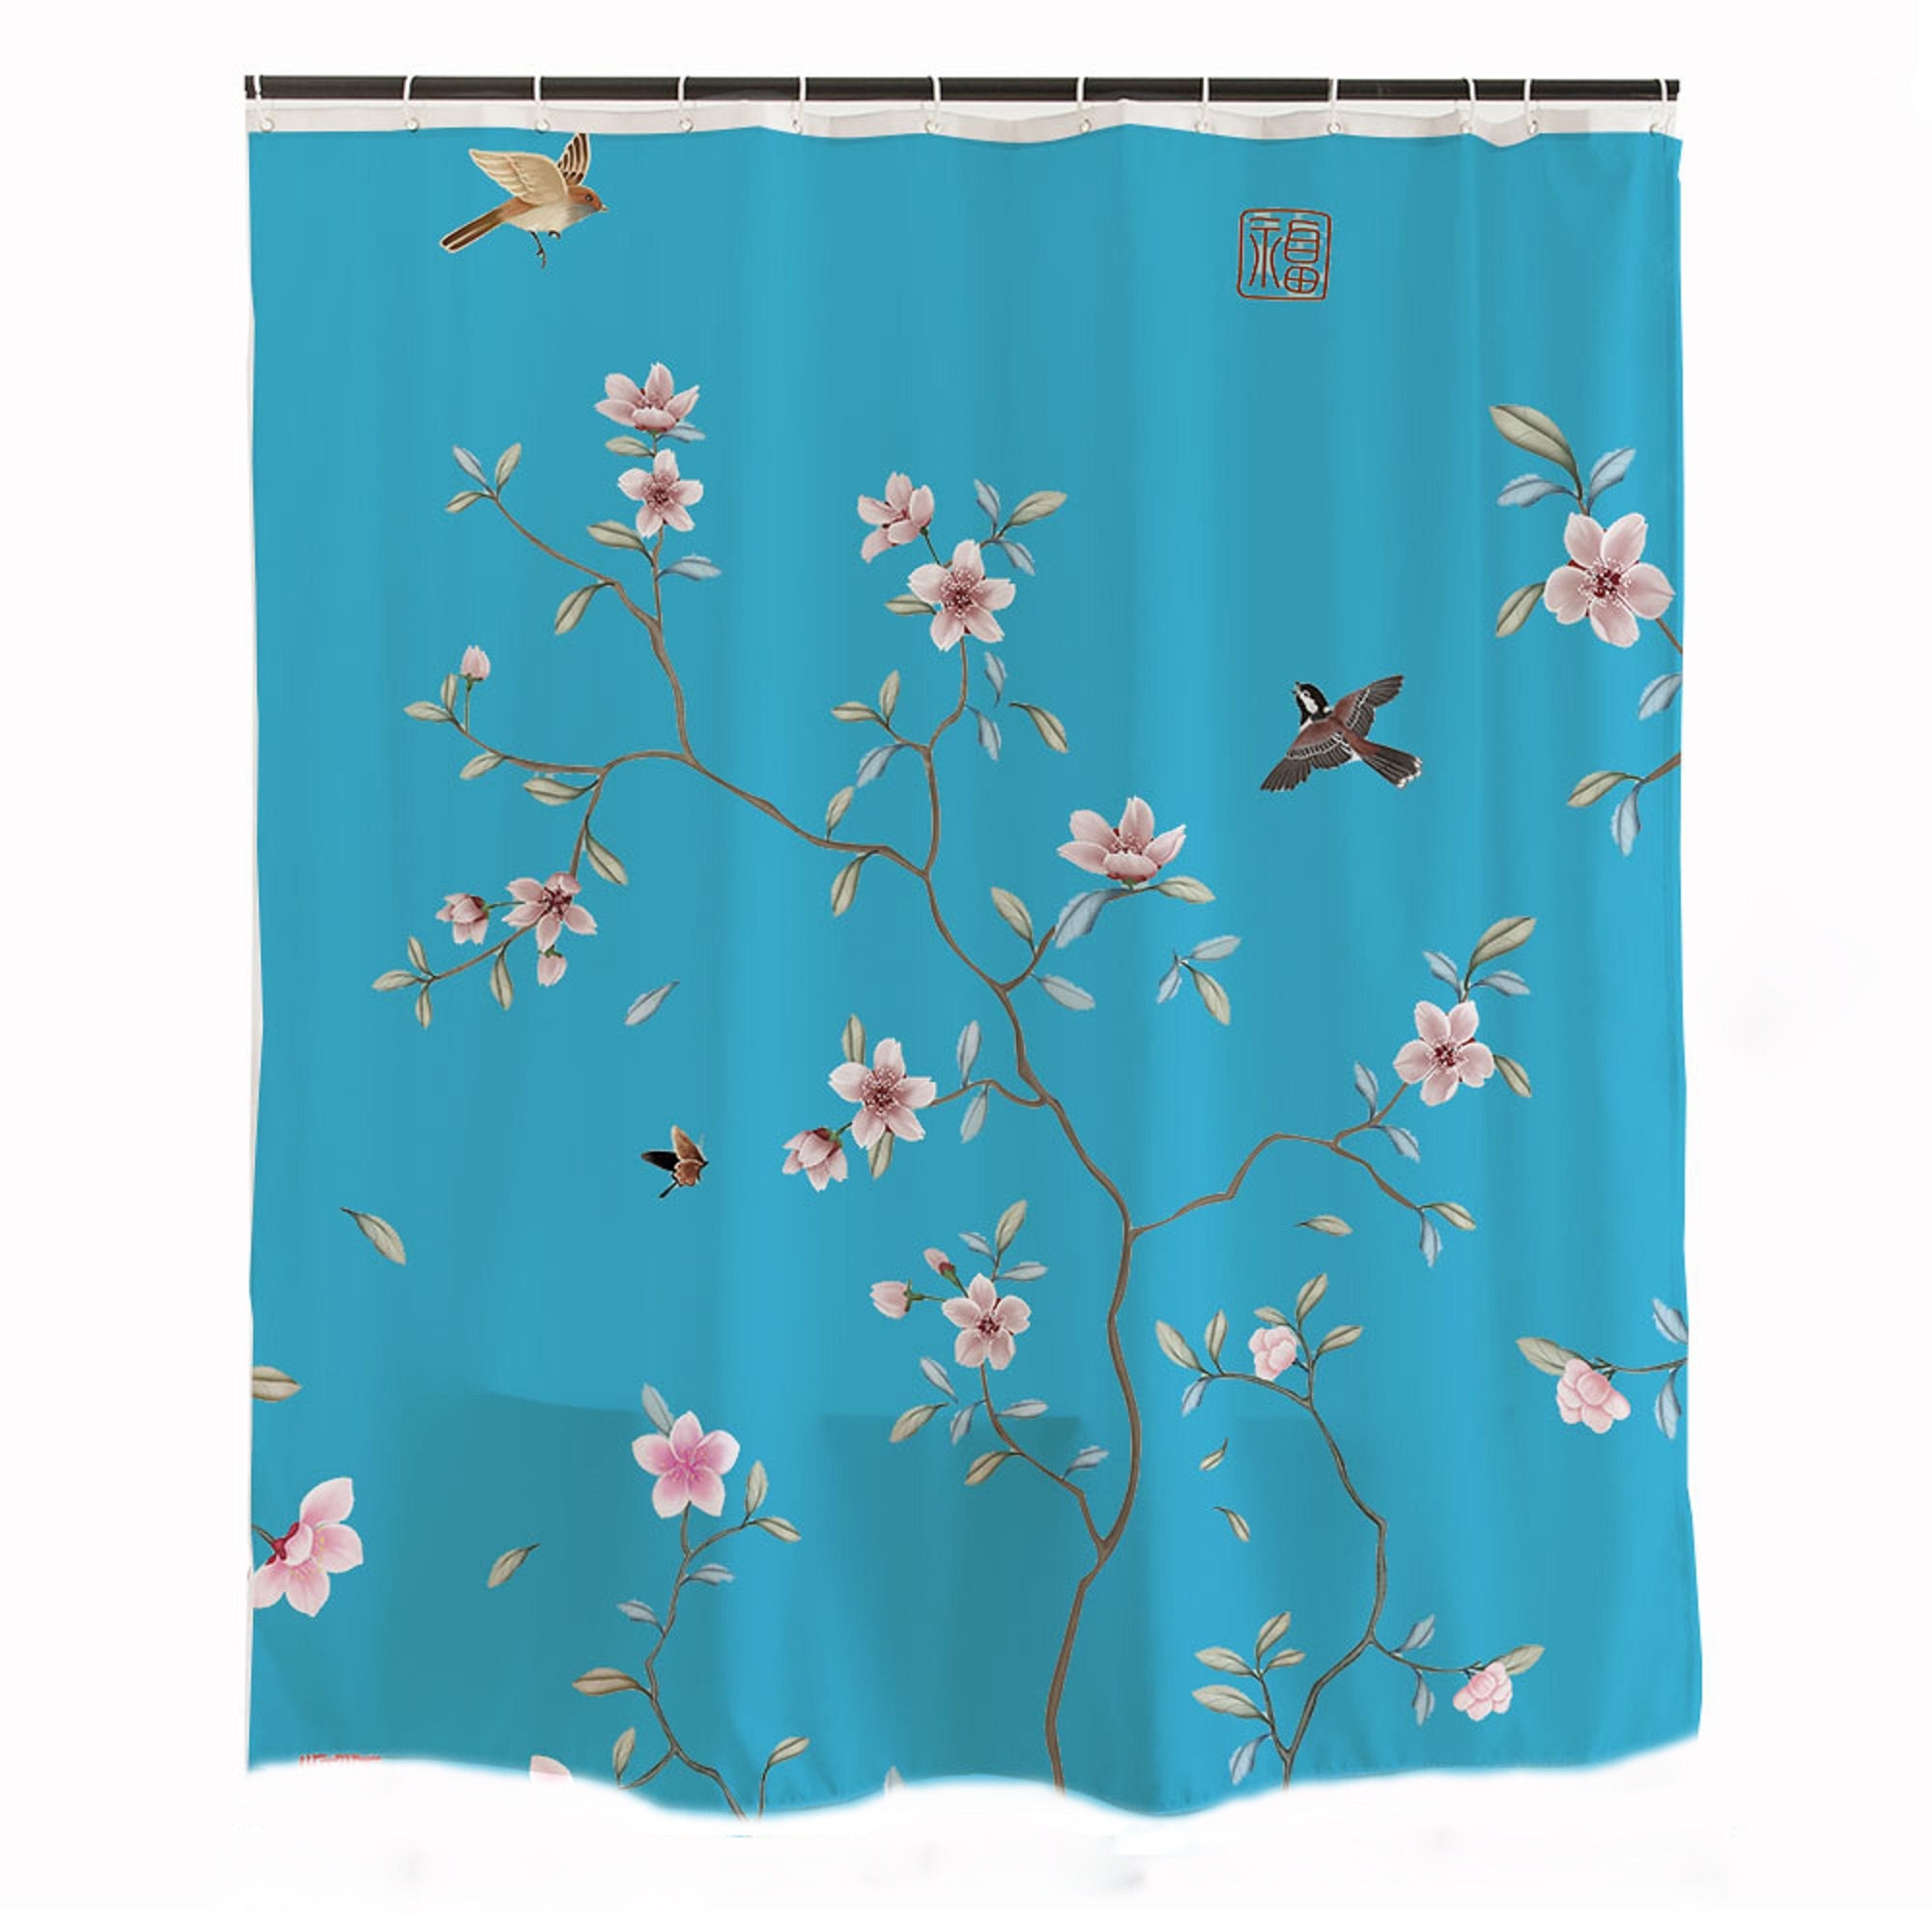 Chinese Bird Painting Shower Curtain, Extra Long Shower Curtain No Hooks